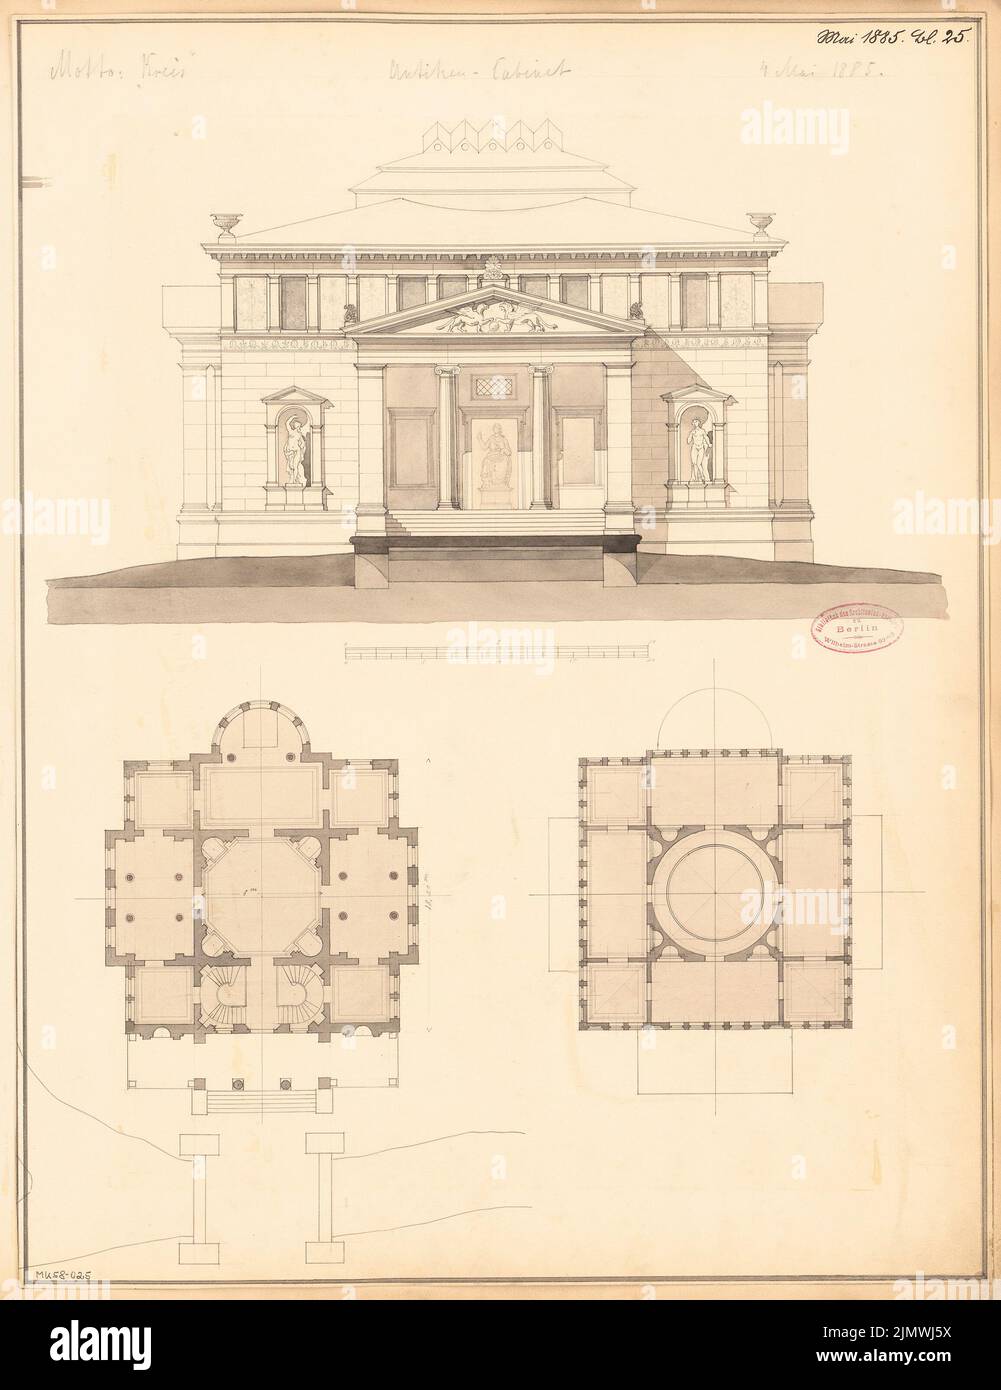 Unknown architect, private museum ('antiquities'). Monthly competition May 1885 (05.1885): floor plan ground floor. Upper floor. Riss front view; 2 scale strips. Ink and pencil watercolored on paper, 57.8 x 44.5 cm (including scan edges) N.N. : Privatmuseum (»Antikenkabinett«). Monatskonkurrenz Mai 1885 Stock Photo